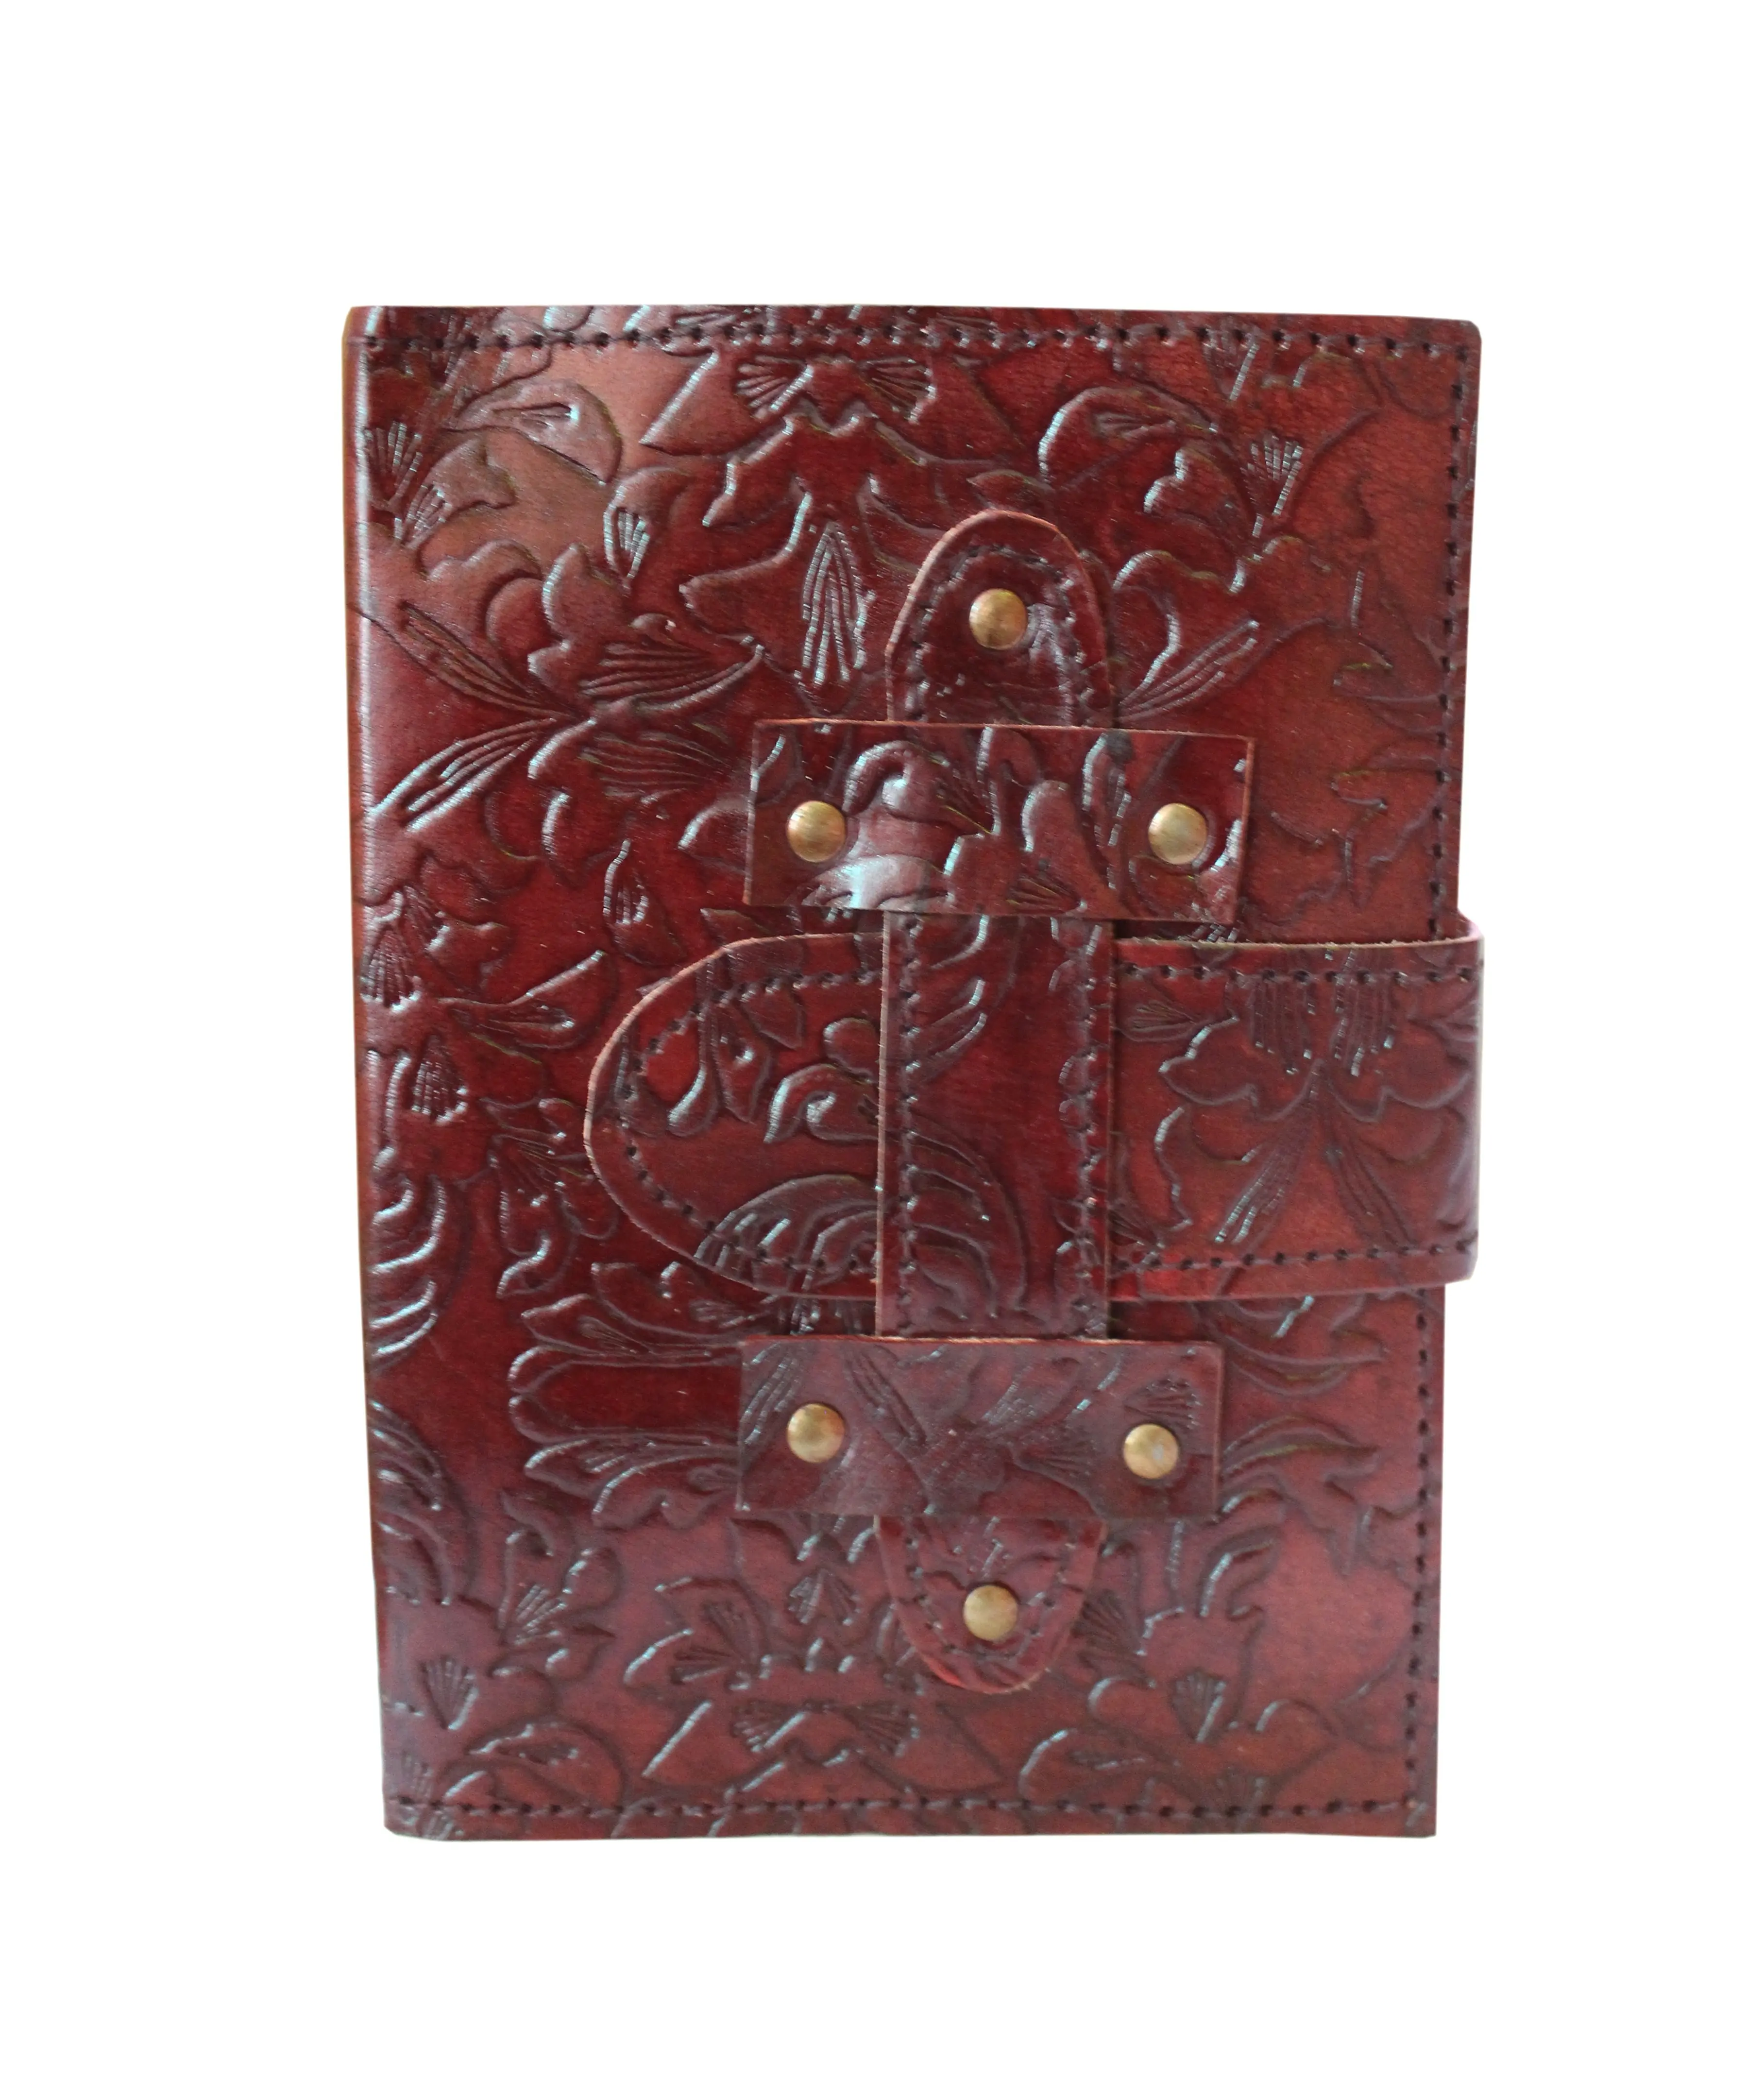 floral design brown color embossed pasted belt closure diary 7x5 notebook leather journal